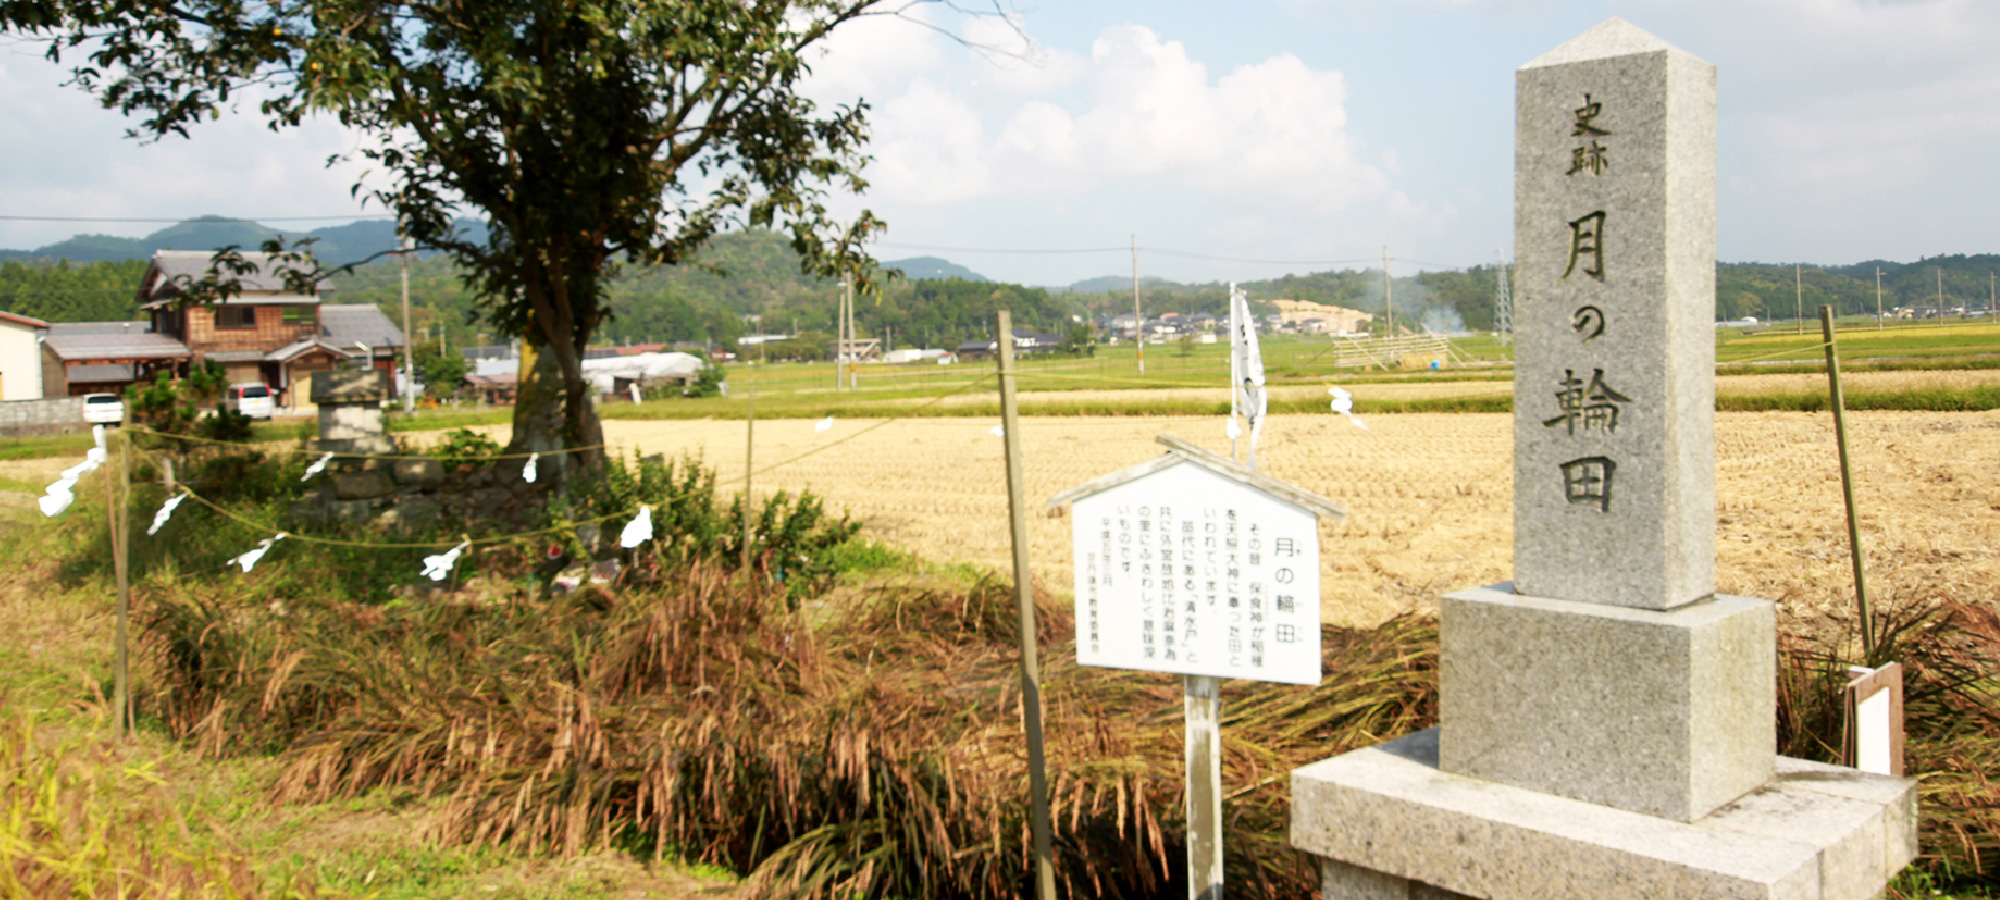 Birthplace of Japanese rice cultivation